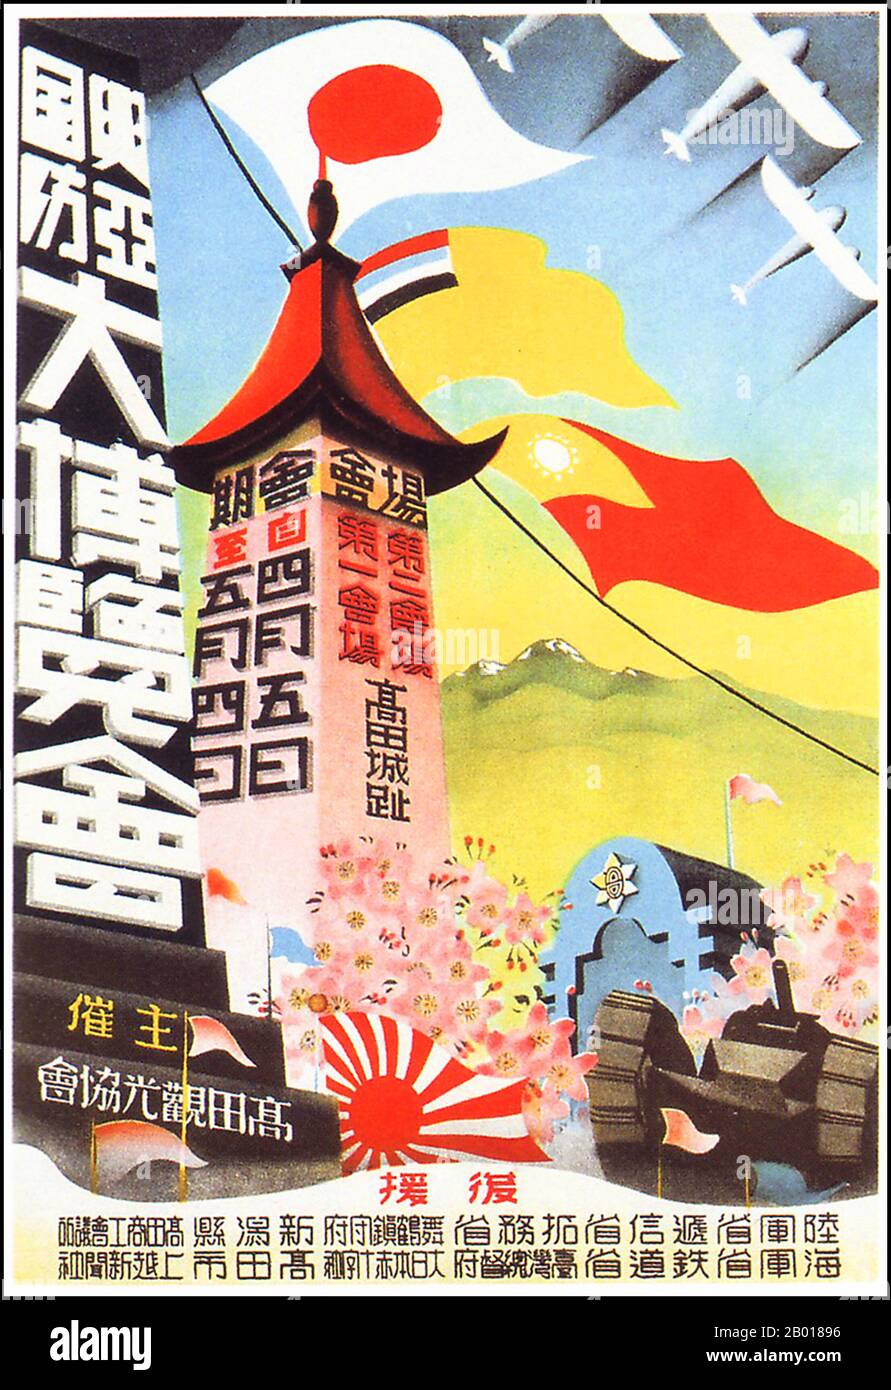 Japan: Poster for the Asia Development and Defense Exposition, Toyota City, 1941.  Exposition poster art in Japan between approximately 1925 and 1941 mirrors the rapid militarisation of society and the growth of militarism, statism and fascism during the Showa Era.  In the 1920s expo poster art features elements of modern art and even Art Deco. Themes are whimsical and outward looking, representing Japan's growing importance and influence in the world of international commerce and art. By the 1930s this kind of poster art had grown much more bleak and less concerned with human themes. Stock Photo